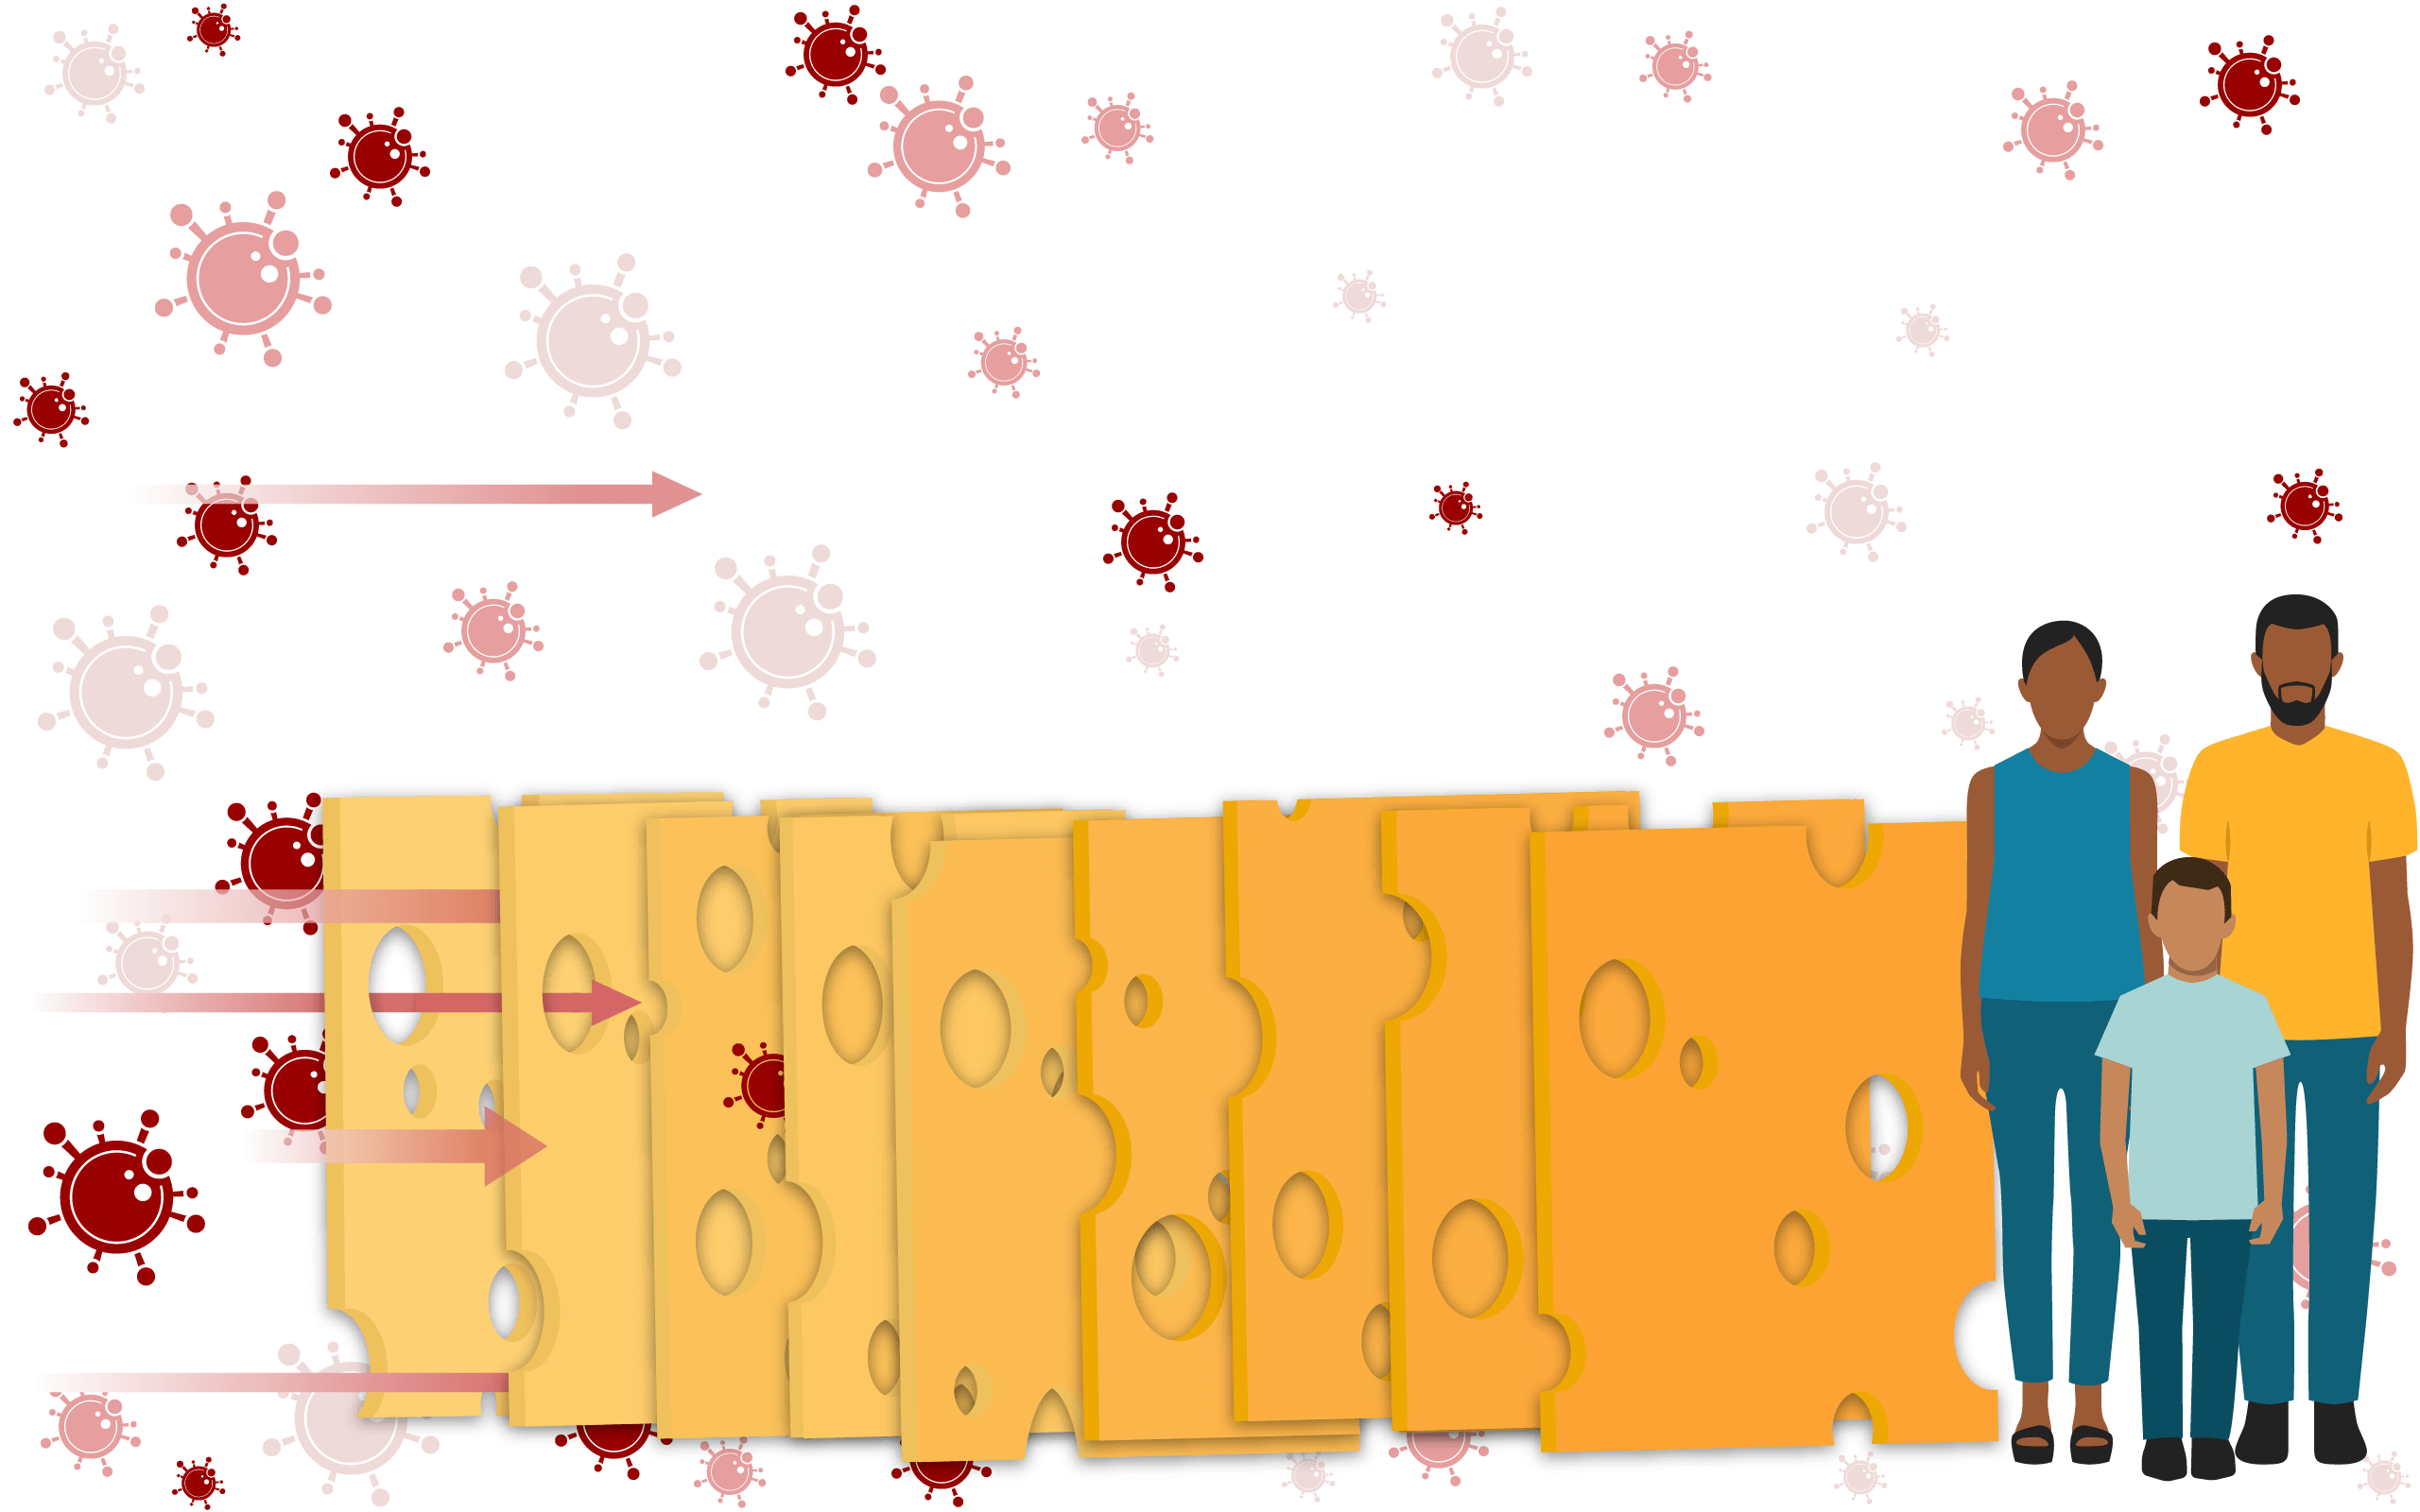 Illustration of a Swiss cheese sliced up